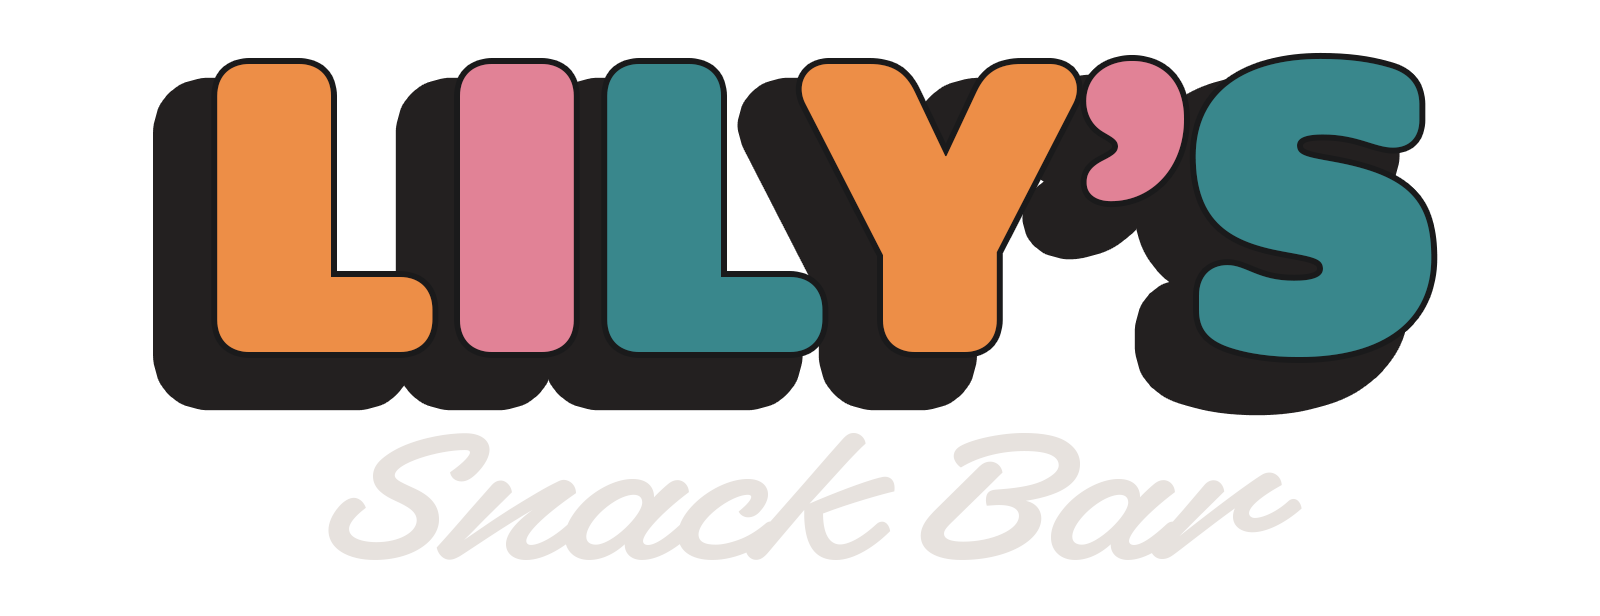 Lily's Snack Bar